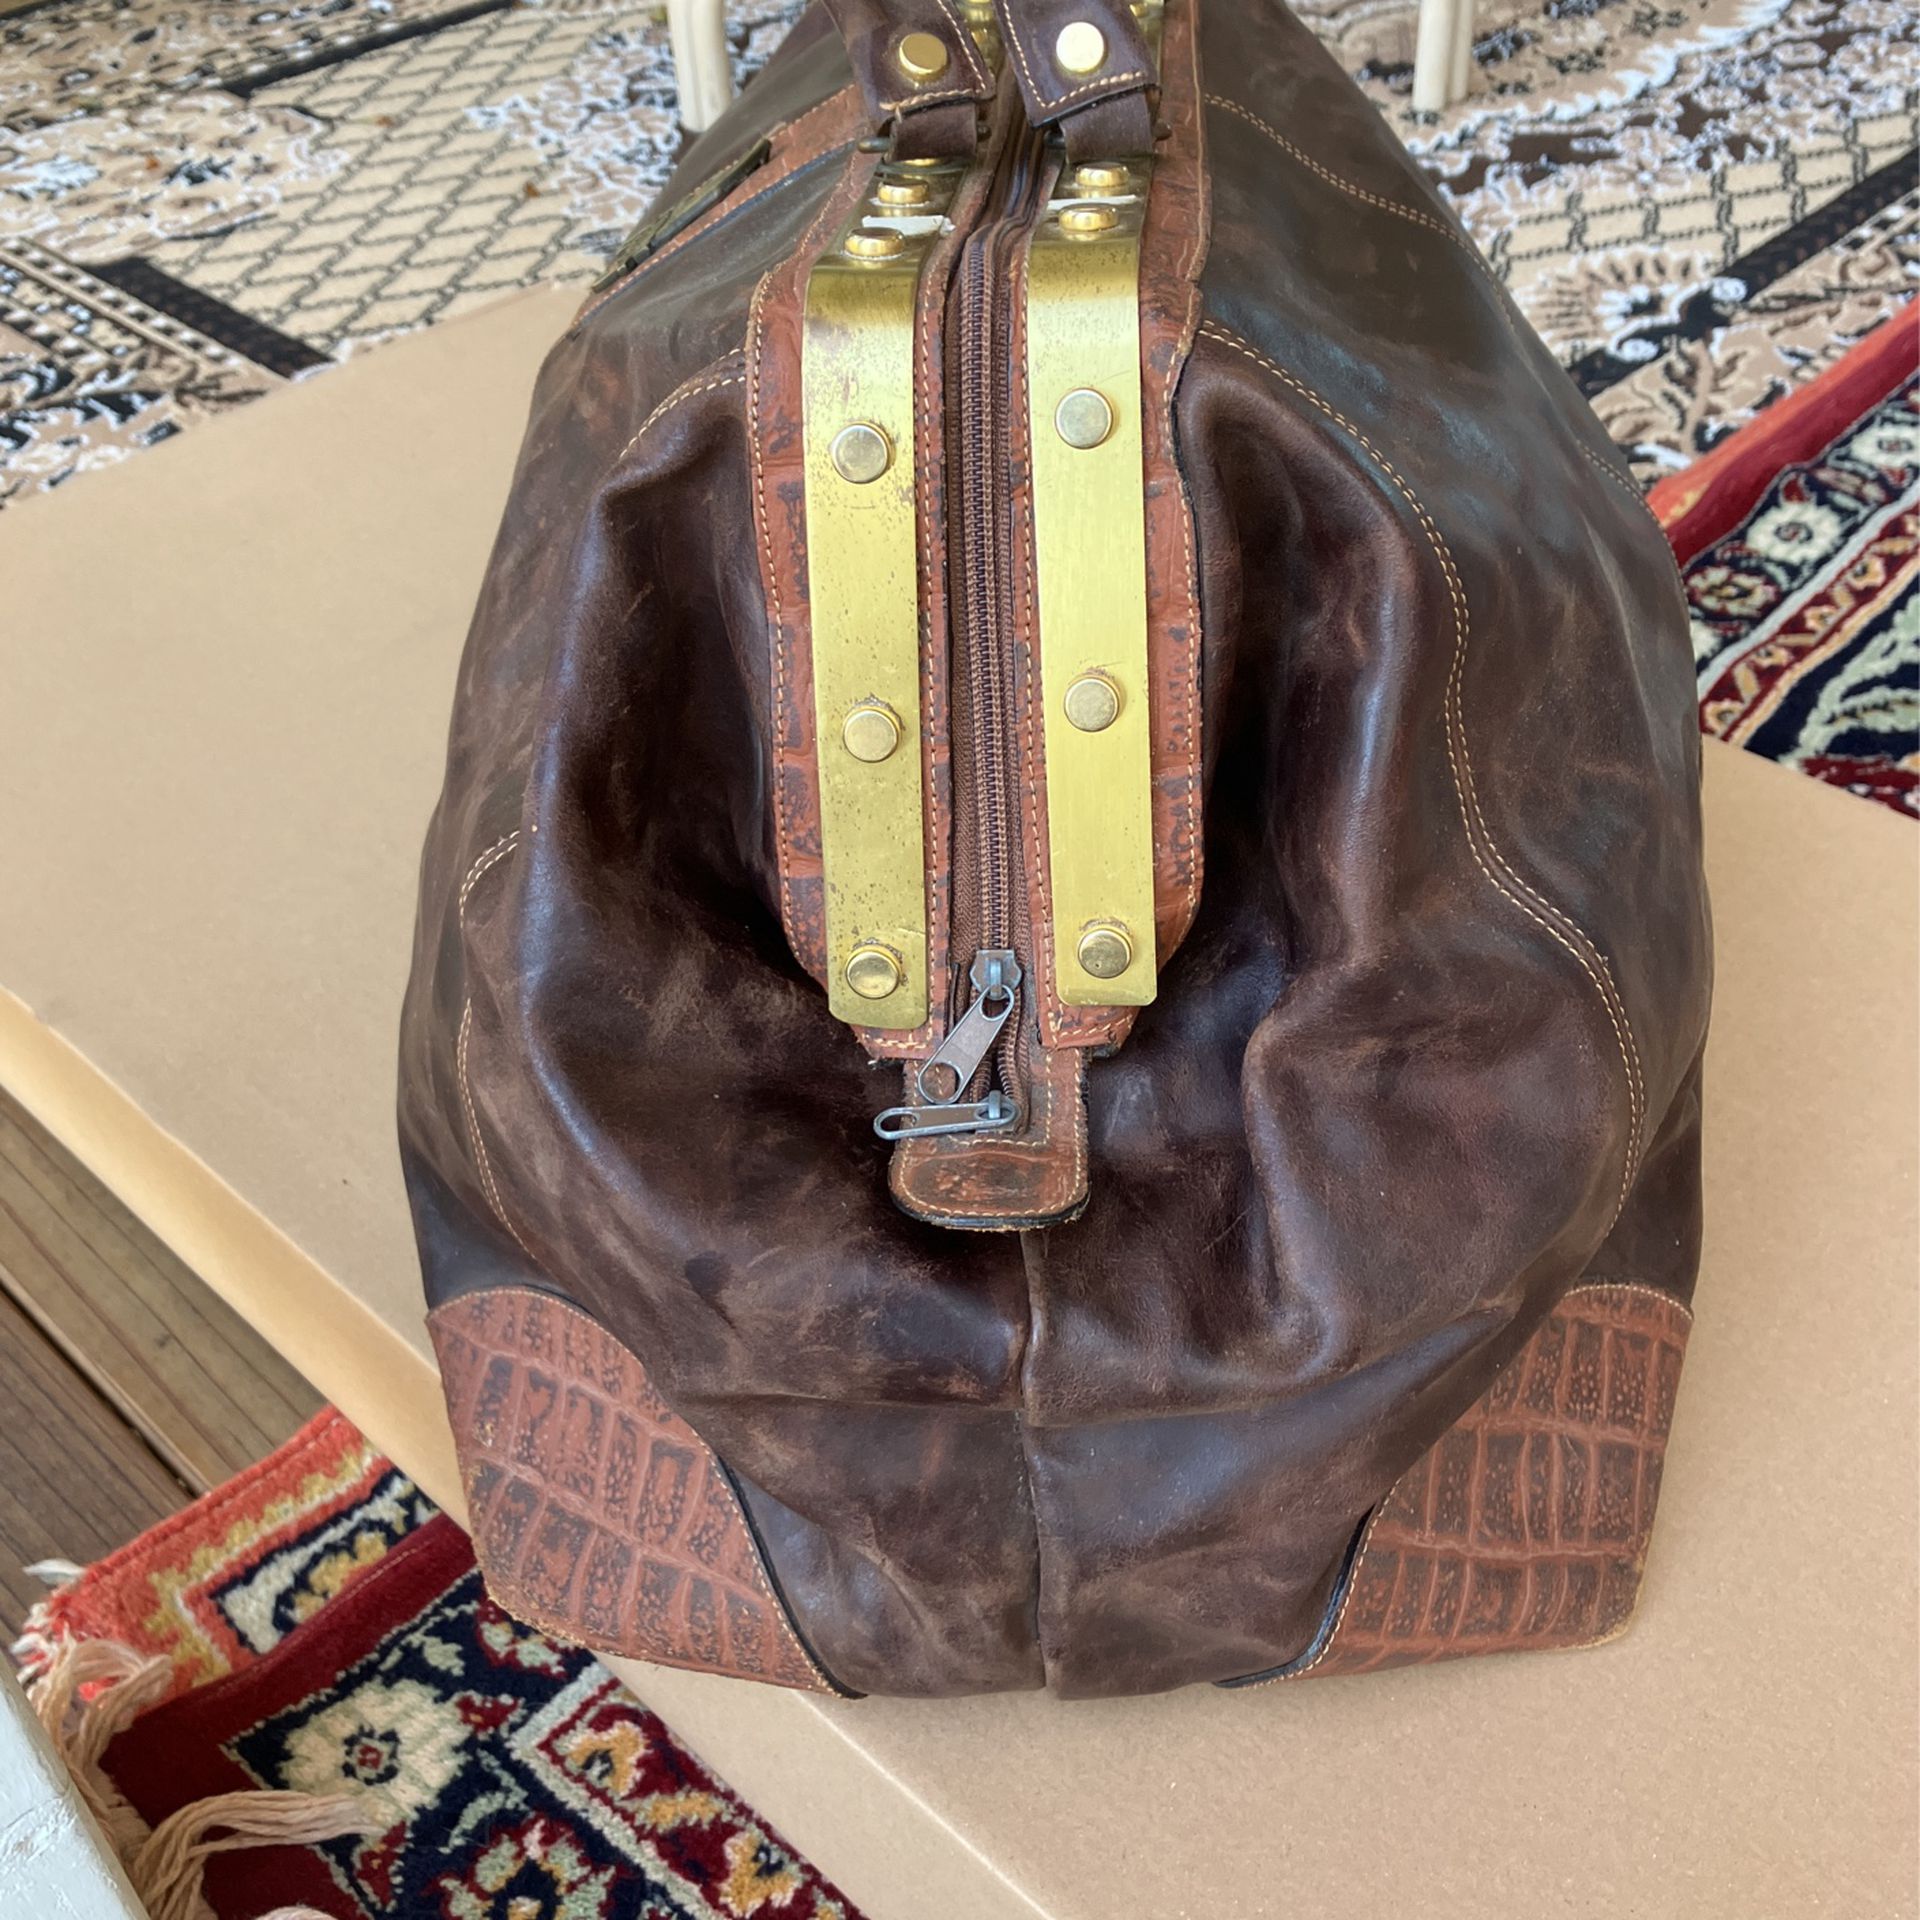 Large Bogg Bag for Sale in Eagle Mountain, UT - OfferUp